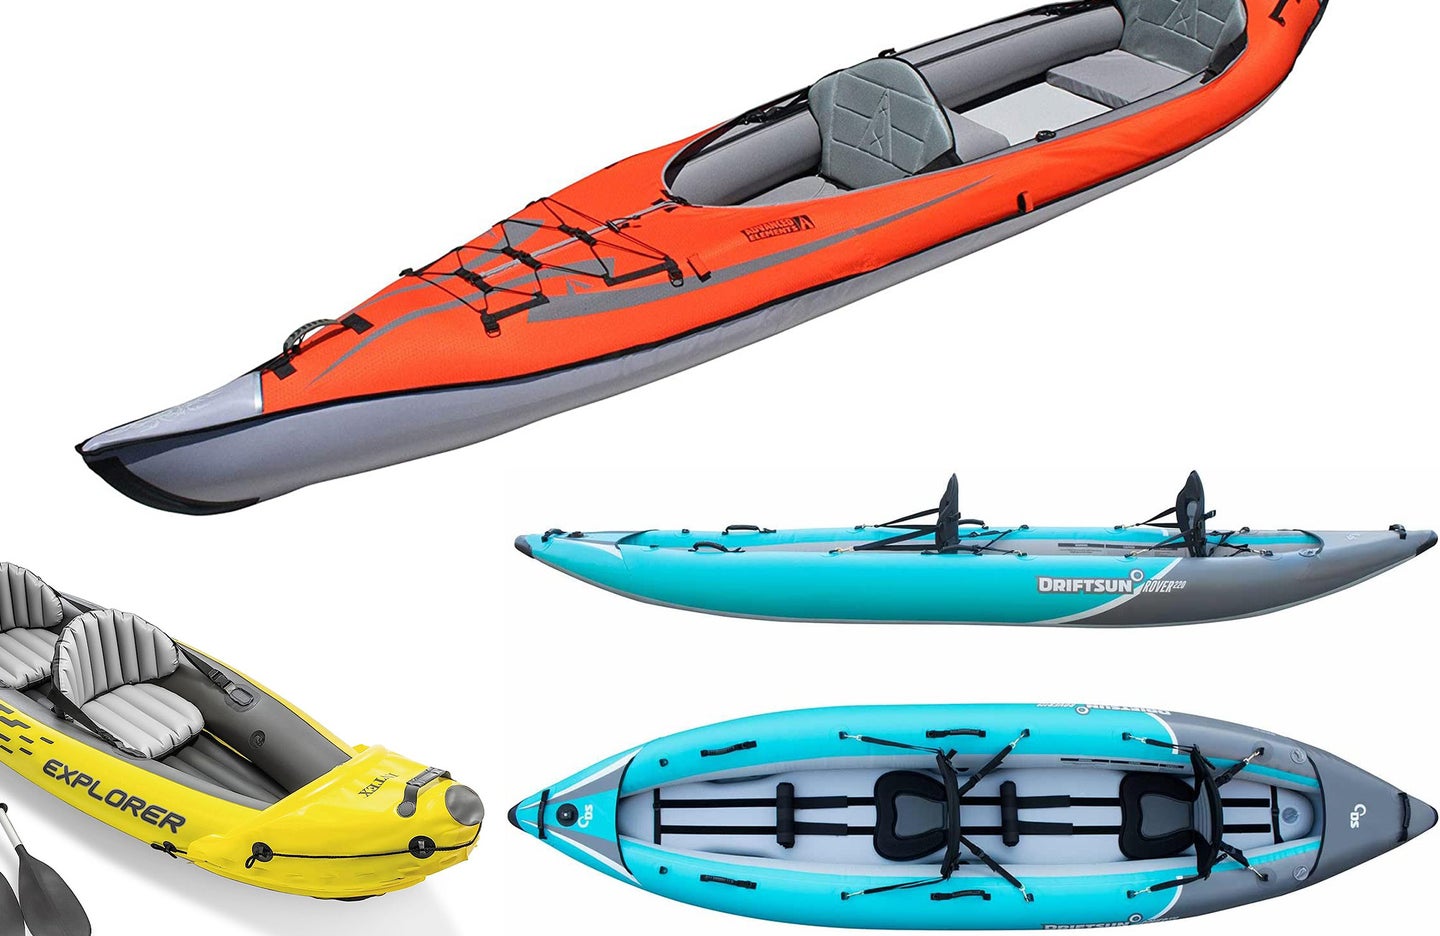 Set sail on one of the best inflatable kayaks.